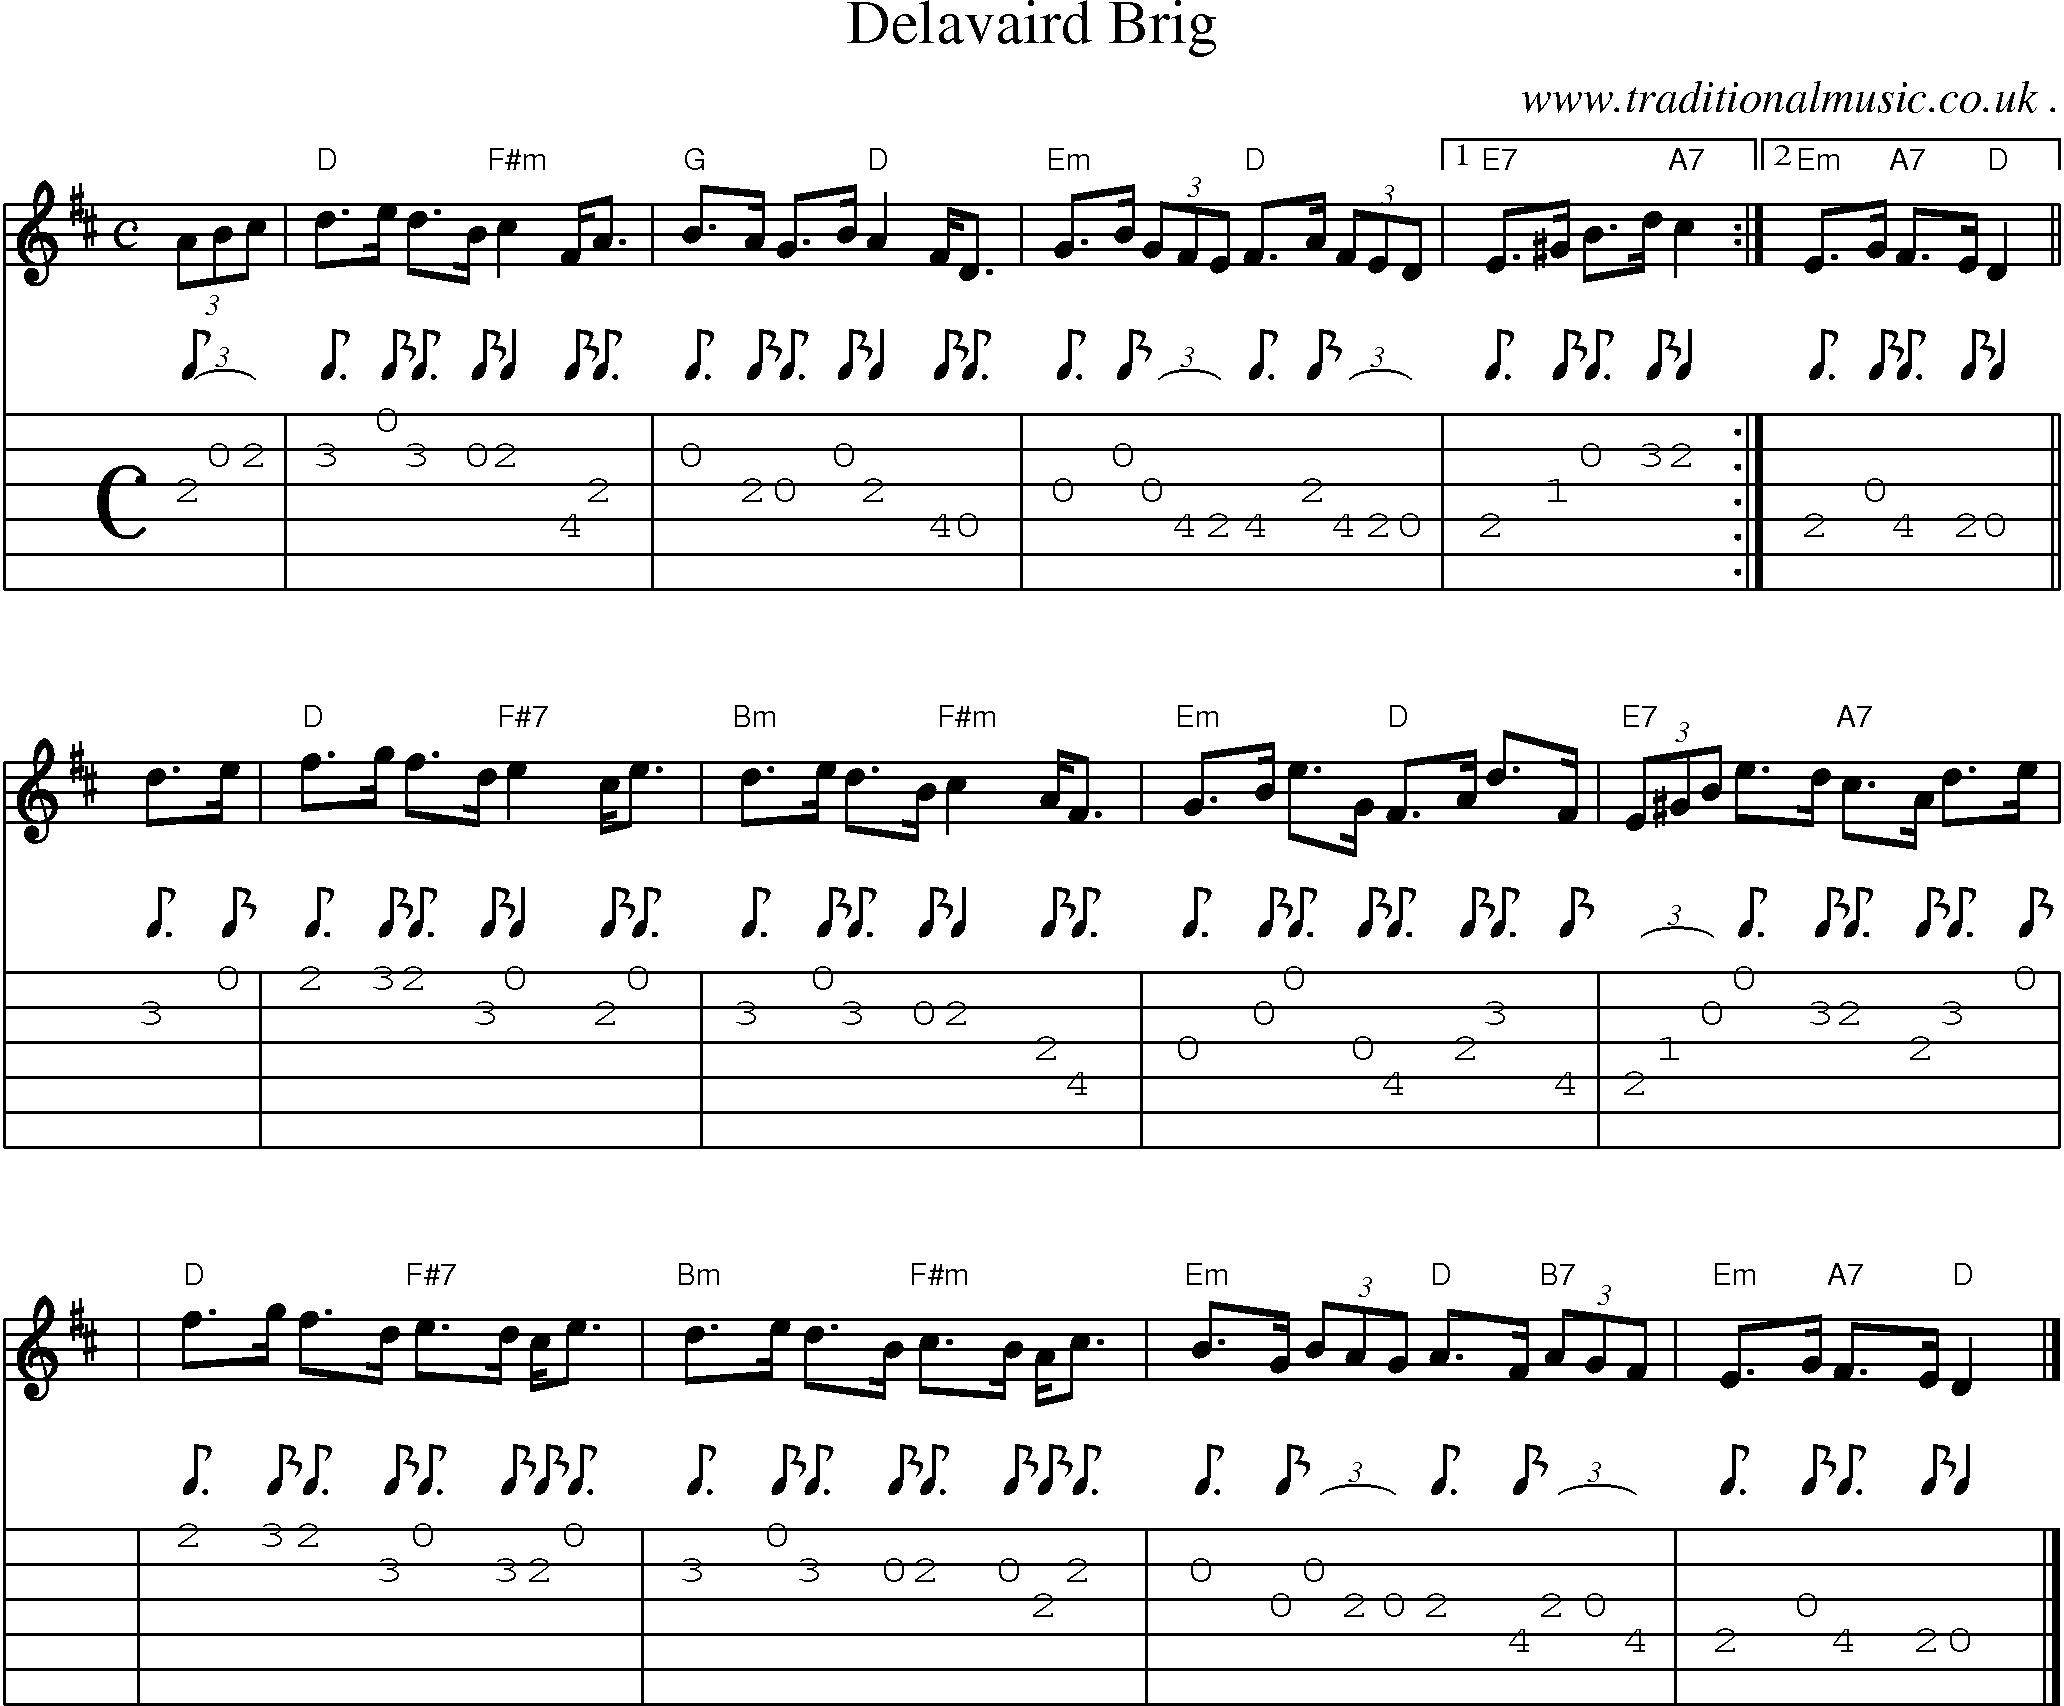 Sheet-music  score, Chords and Guitar Tabs for Delavaird Brig